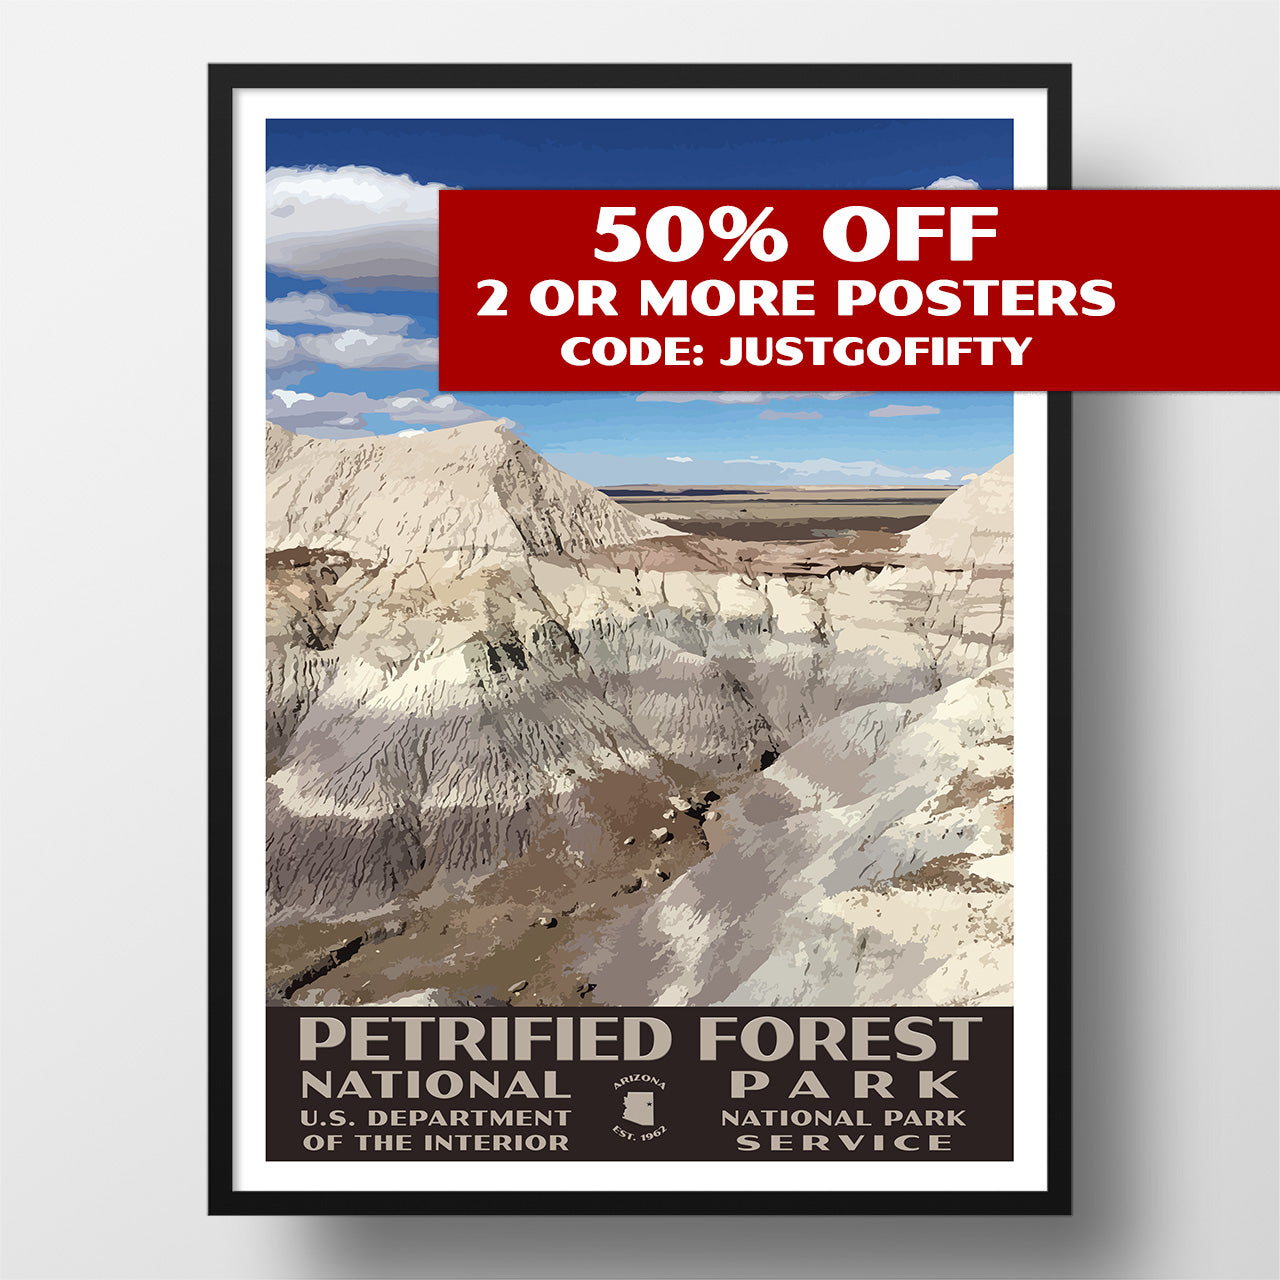 Petrified Forest National Park poster